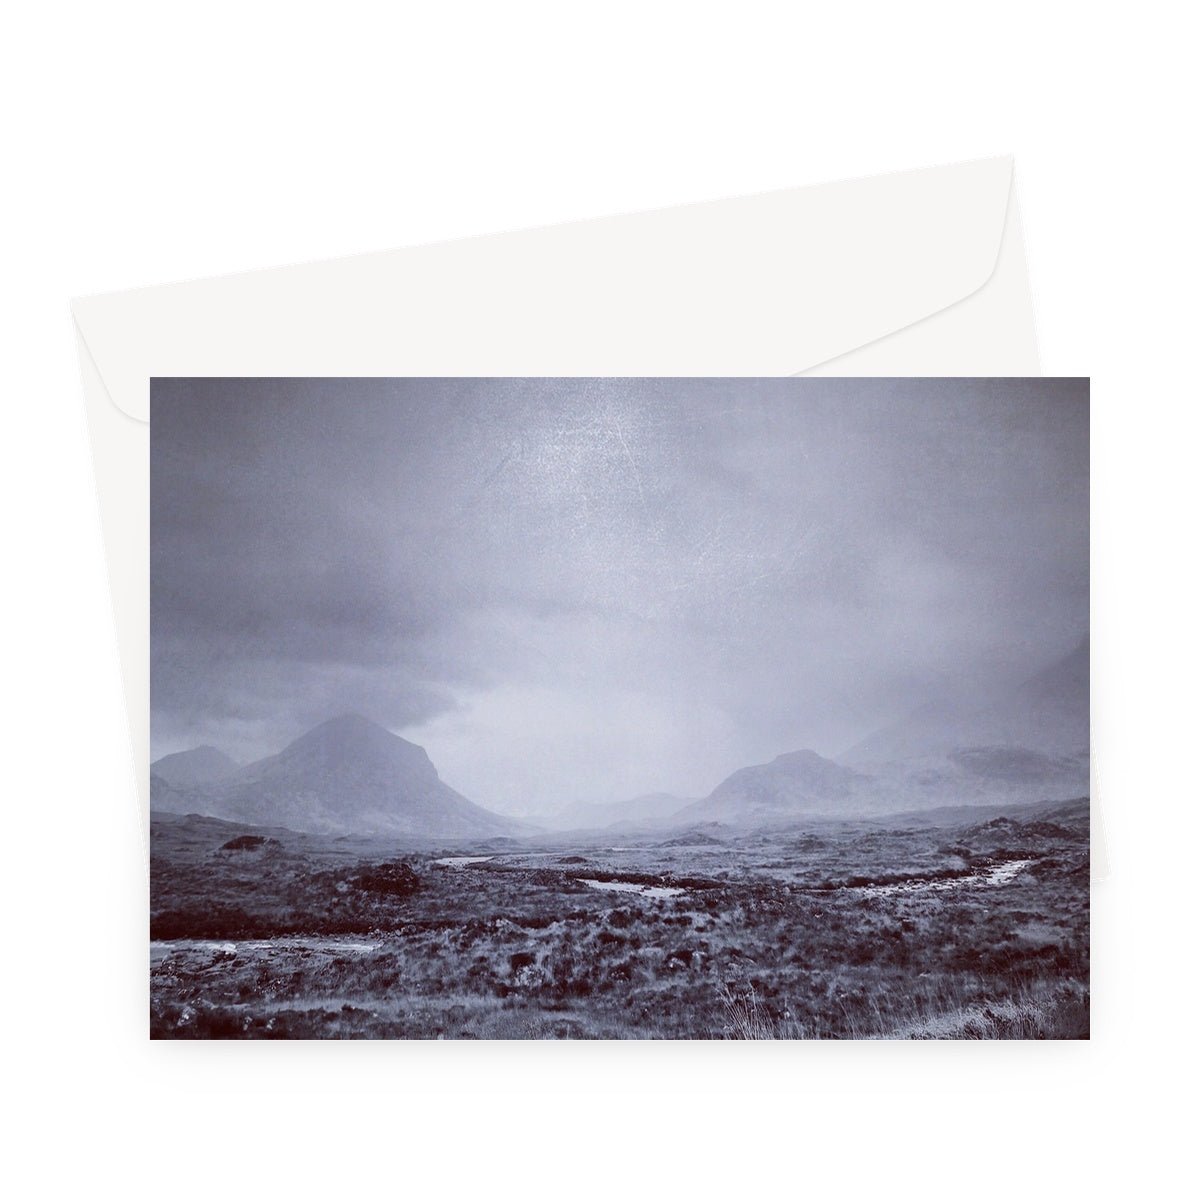 The Brooding Cuillin Skye Art Gifts Greeting Card-Greetings Cards-Skye Art Gallery-A5 Landscape-1 Card-Paintings, Prints, Homeware, Art Gifts From Scotland By Scottish Artist Kevin Hunter